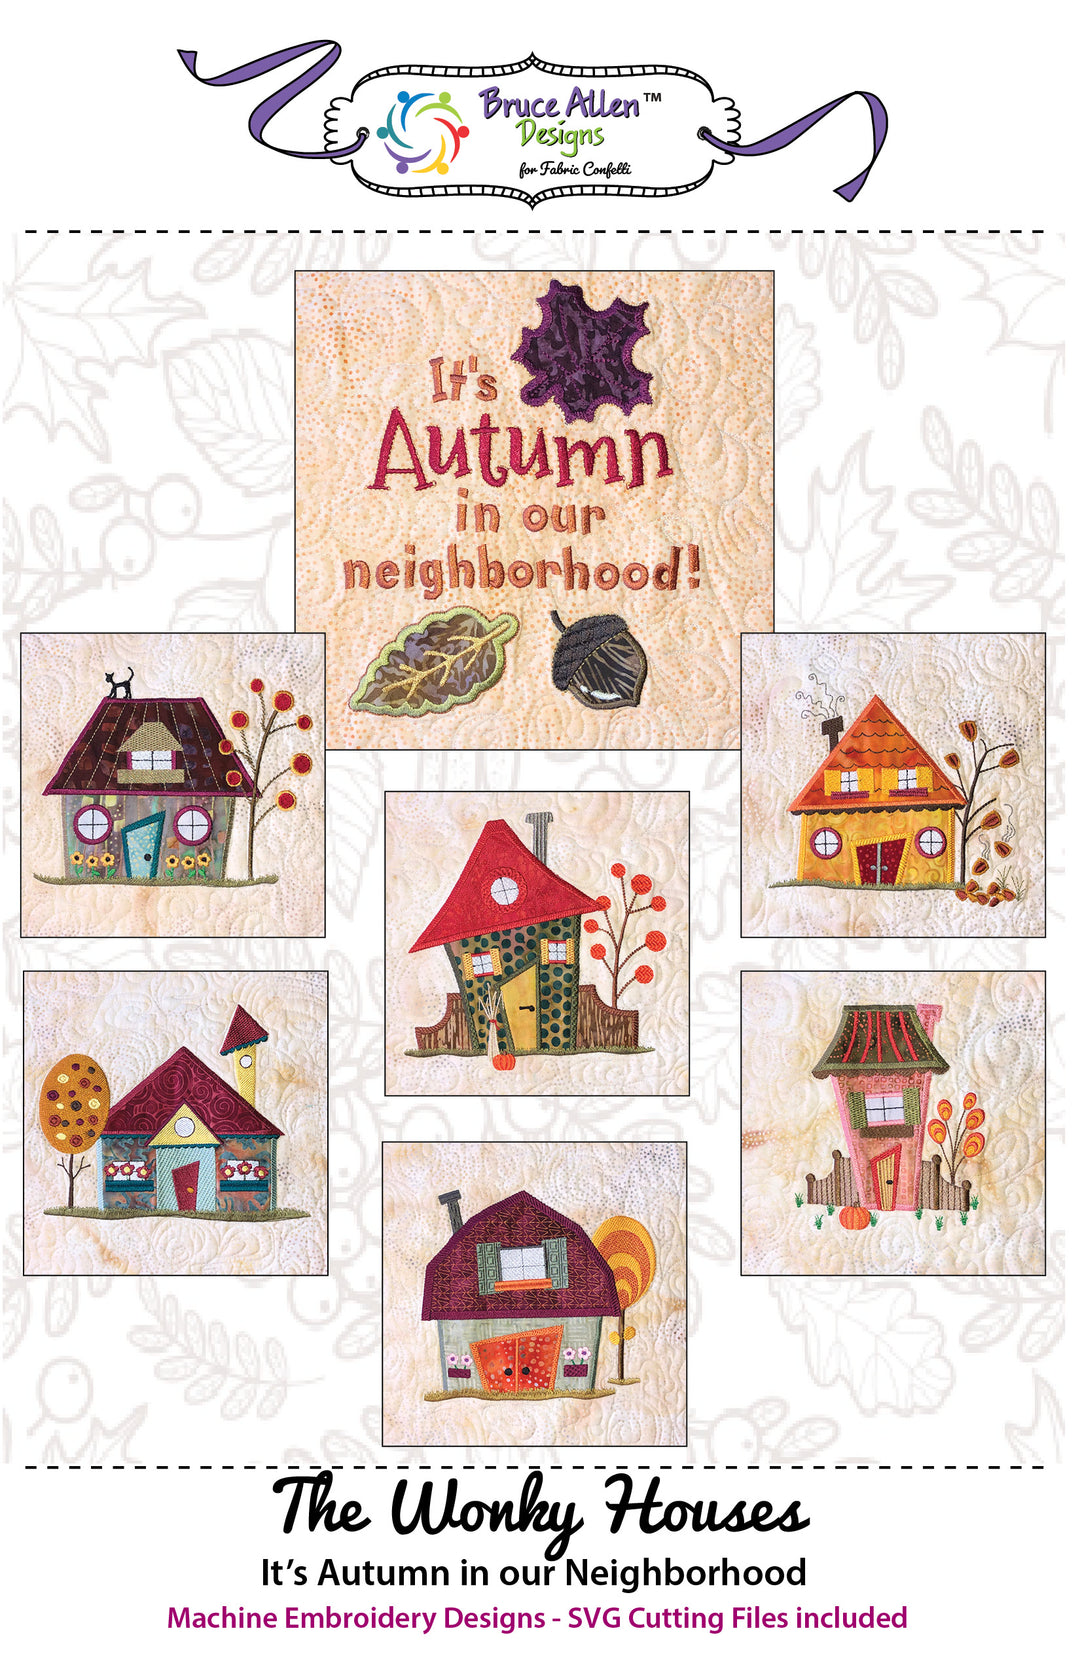 Autumn Collection Embroidery CD